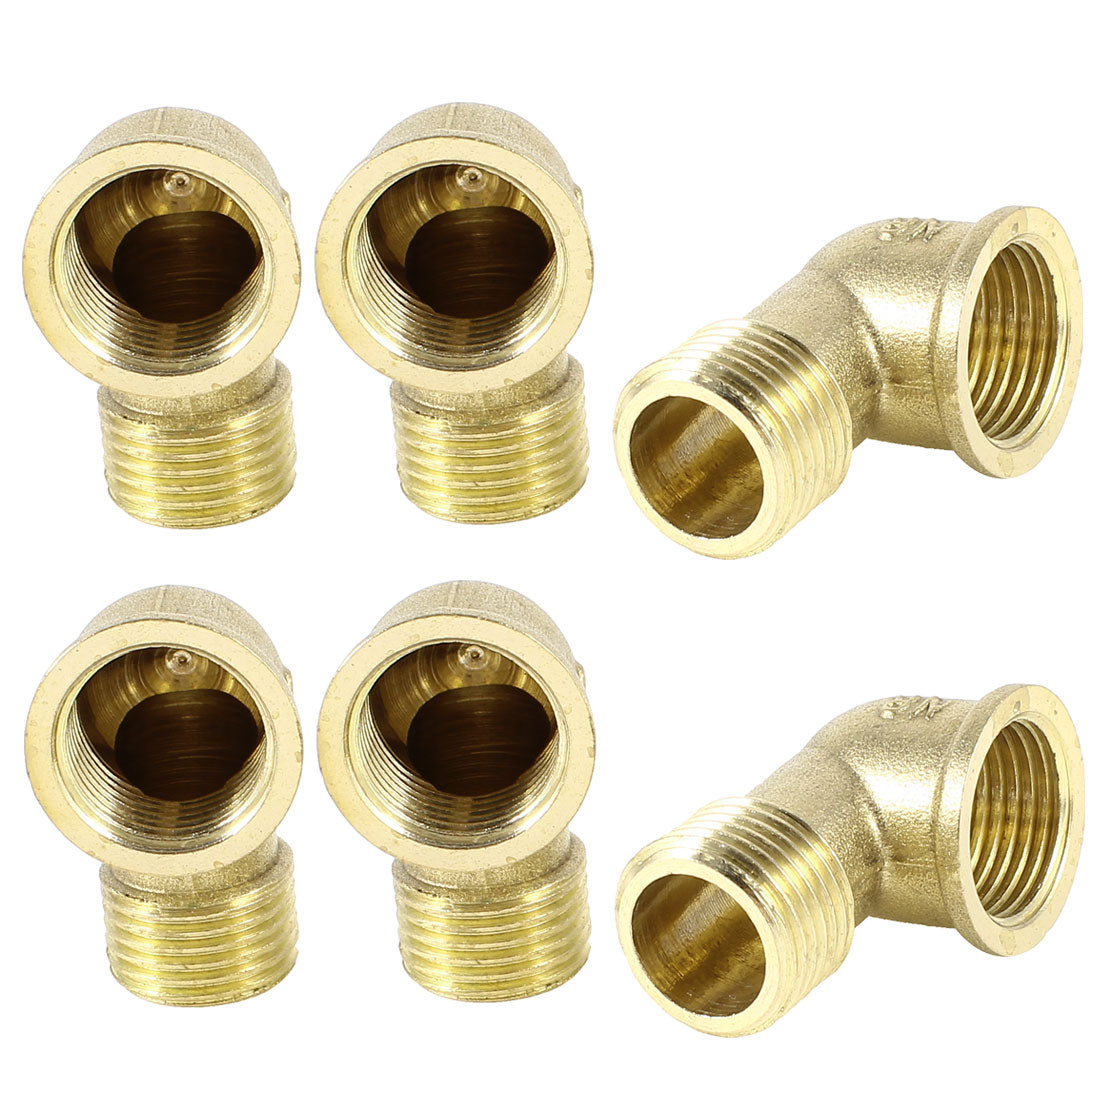 uxcell Uxcell 6pcs Gold Tone 1/2PT Female x 1/2PT Male Thread 90 Degree Street Elbow Brass Pipe Fitting